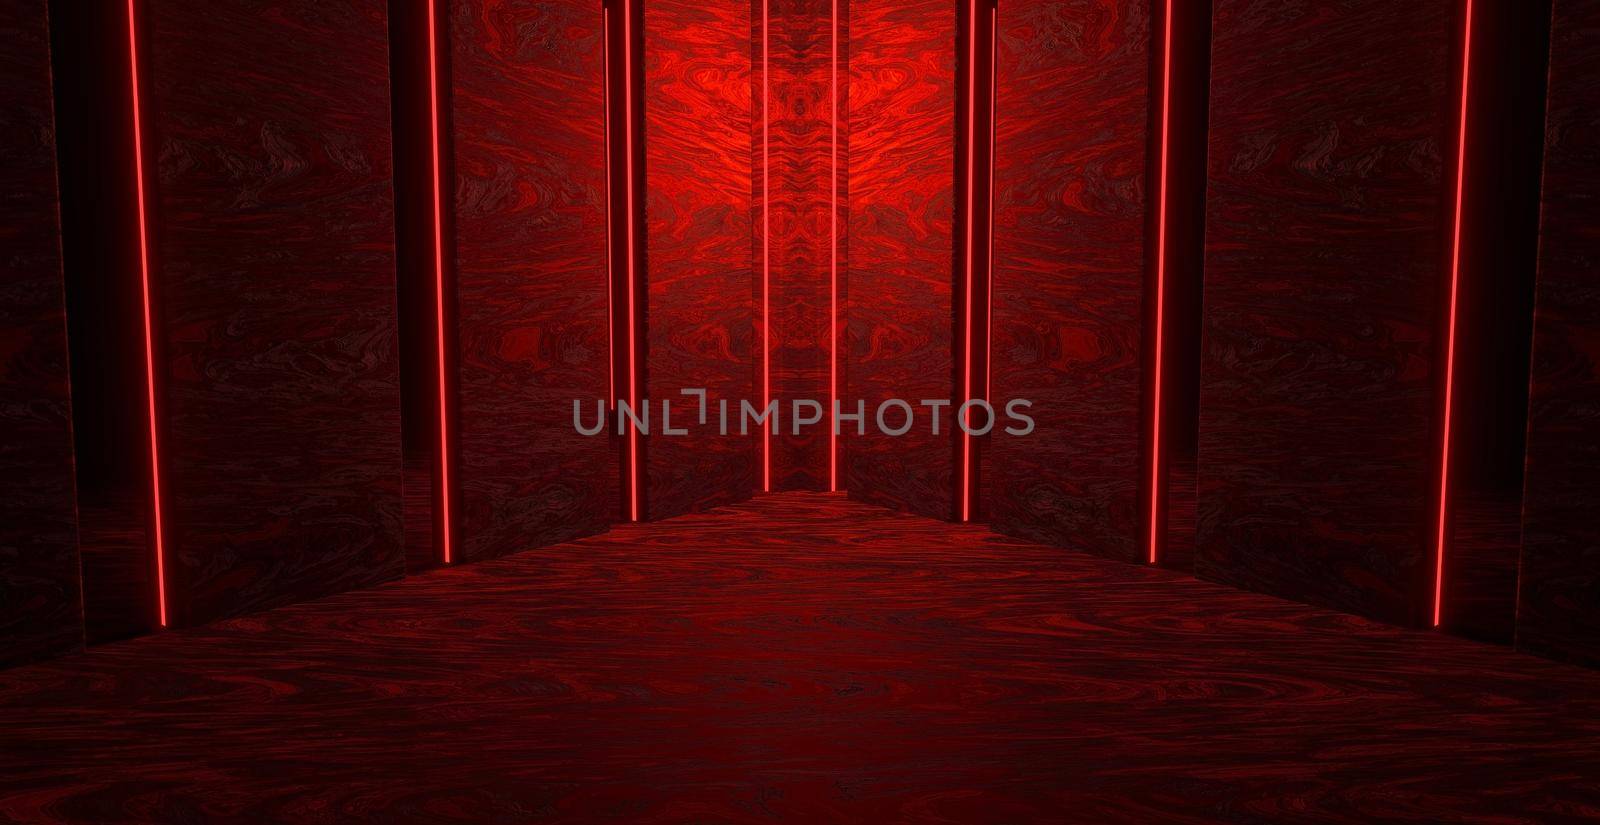 Artificial Intelligence Glowing Fluorescent Garage Underground Parking Car Showcase Empty Spotlight Red Abstract Background With Space For Products